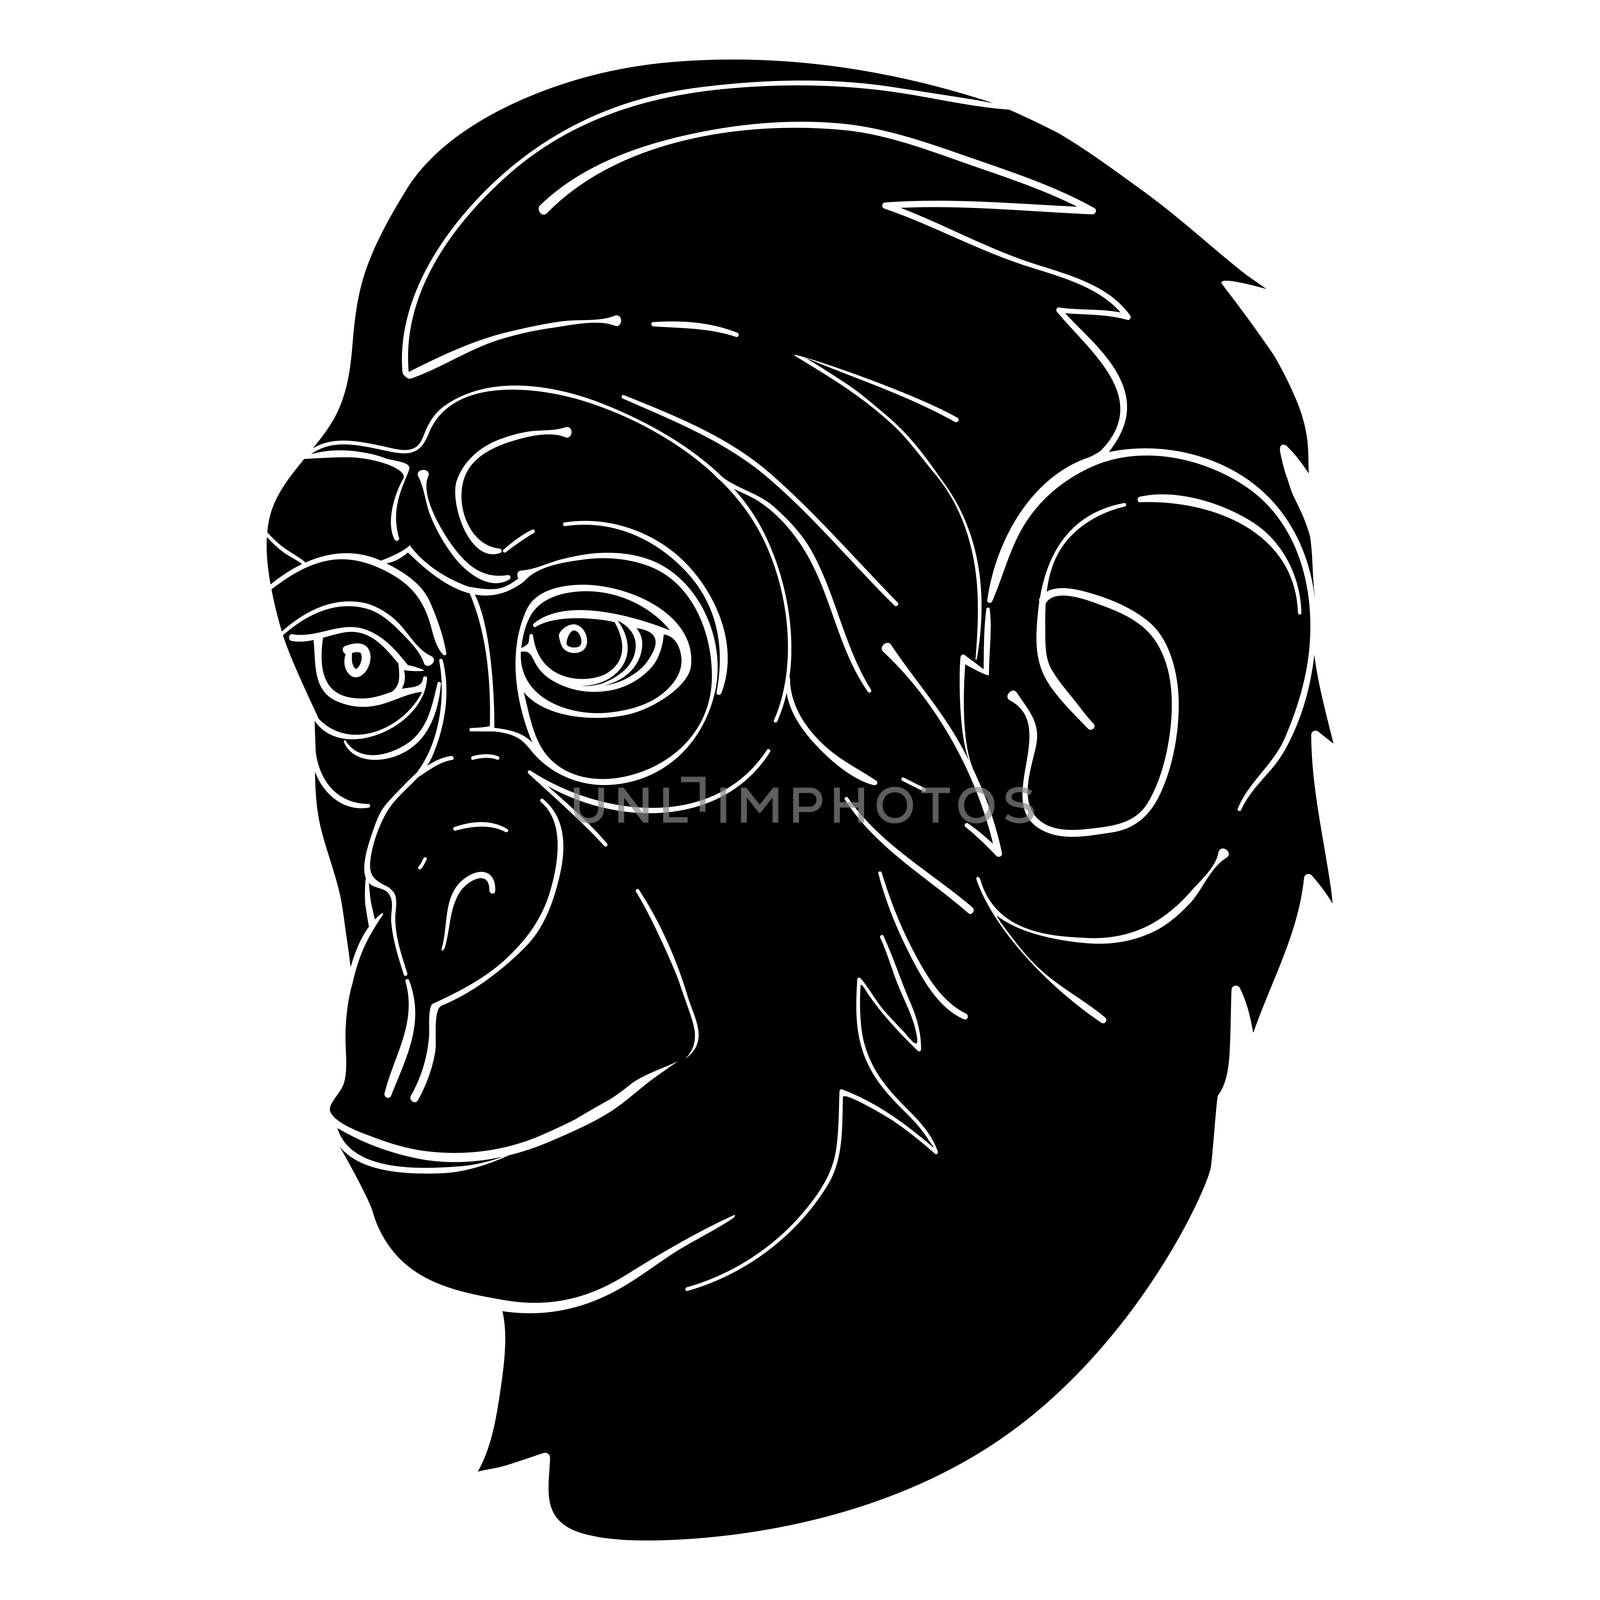 Monkey head avatar, Chinese zodiac sign, black silhouette isolated on white